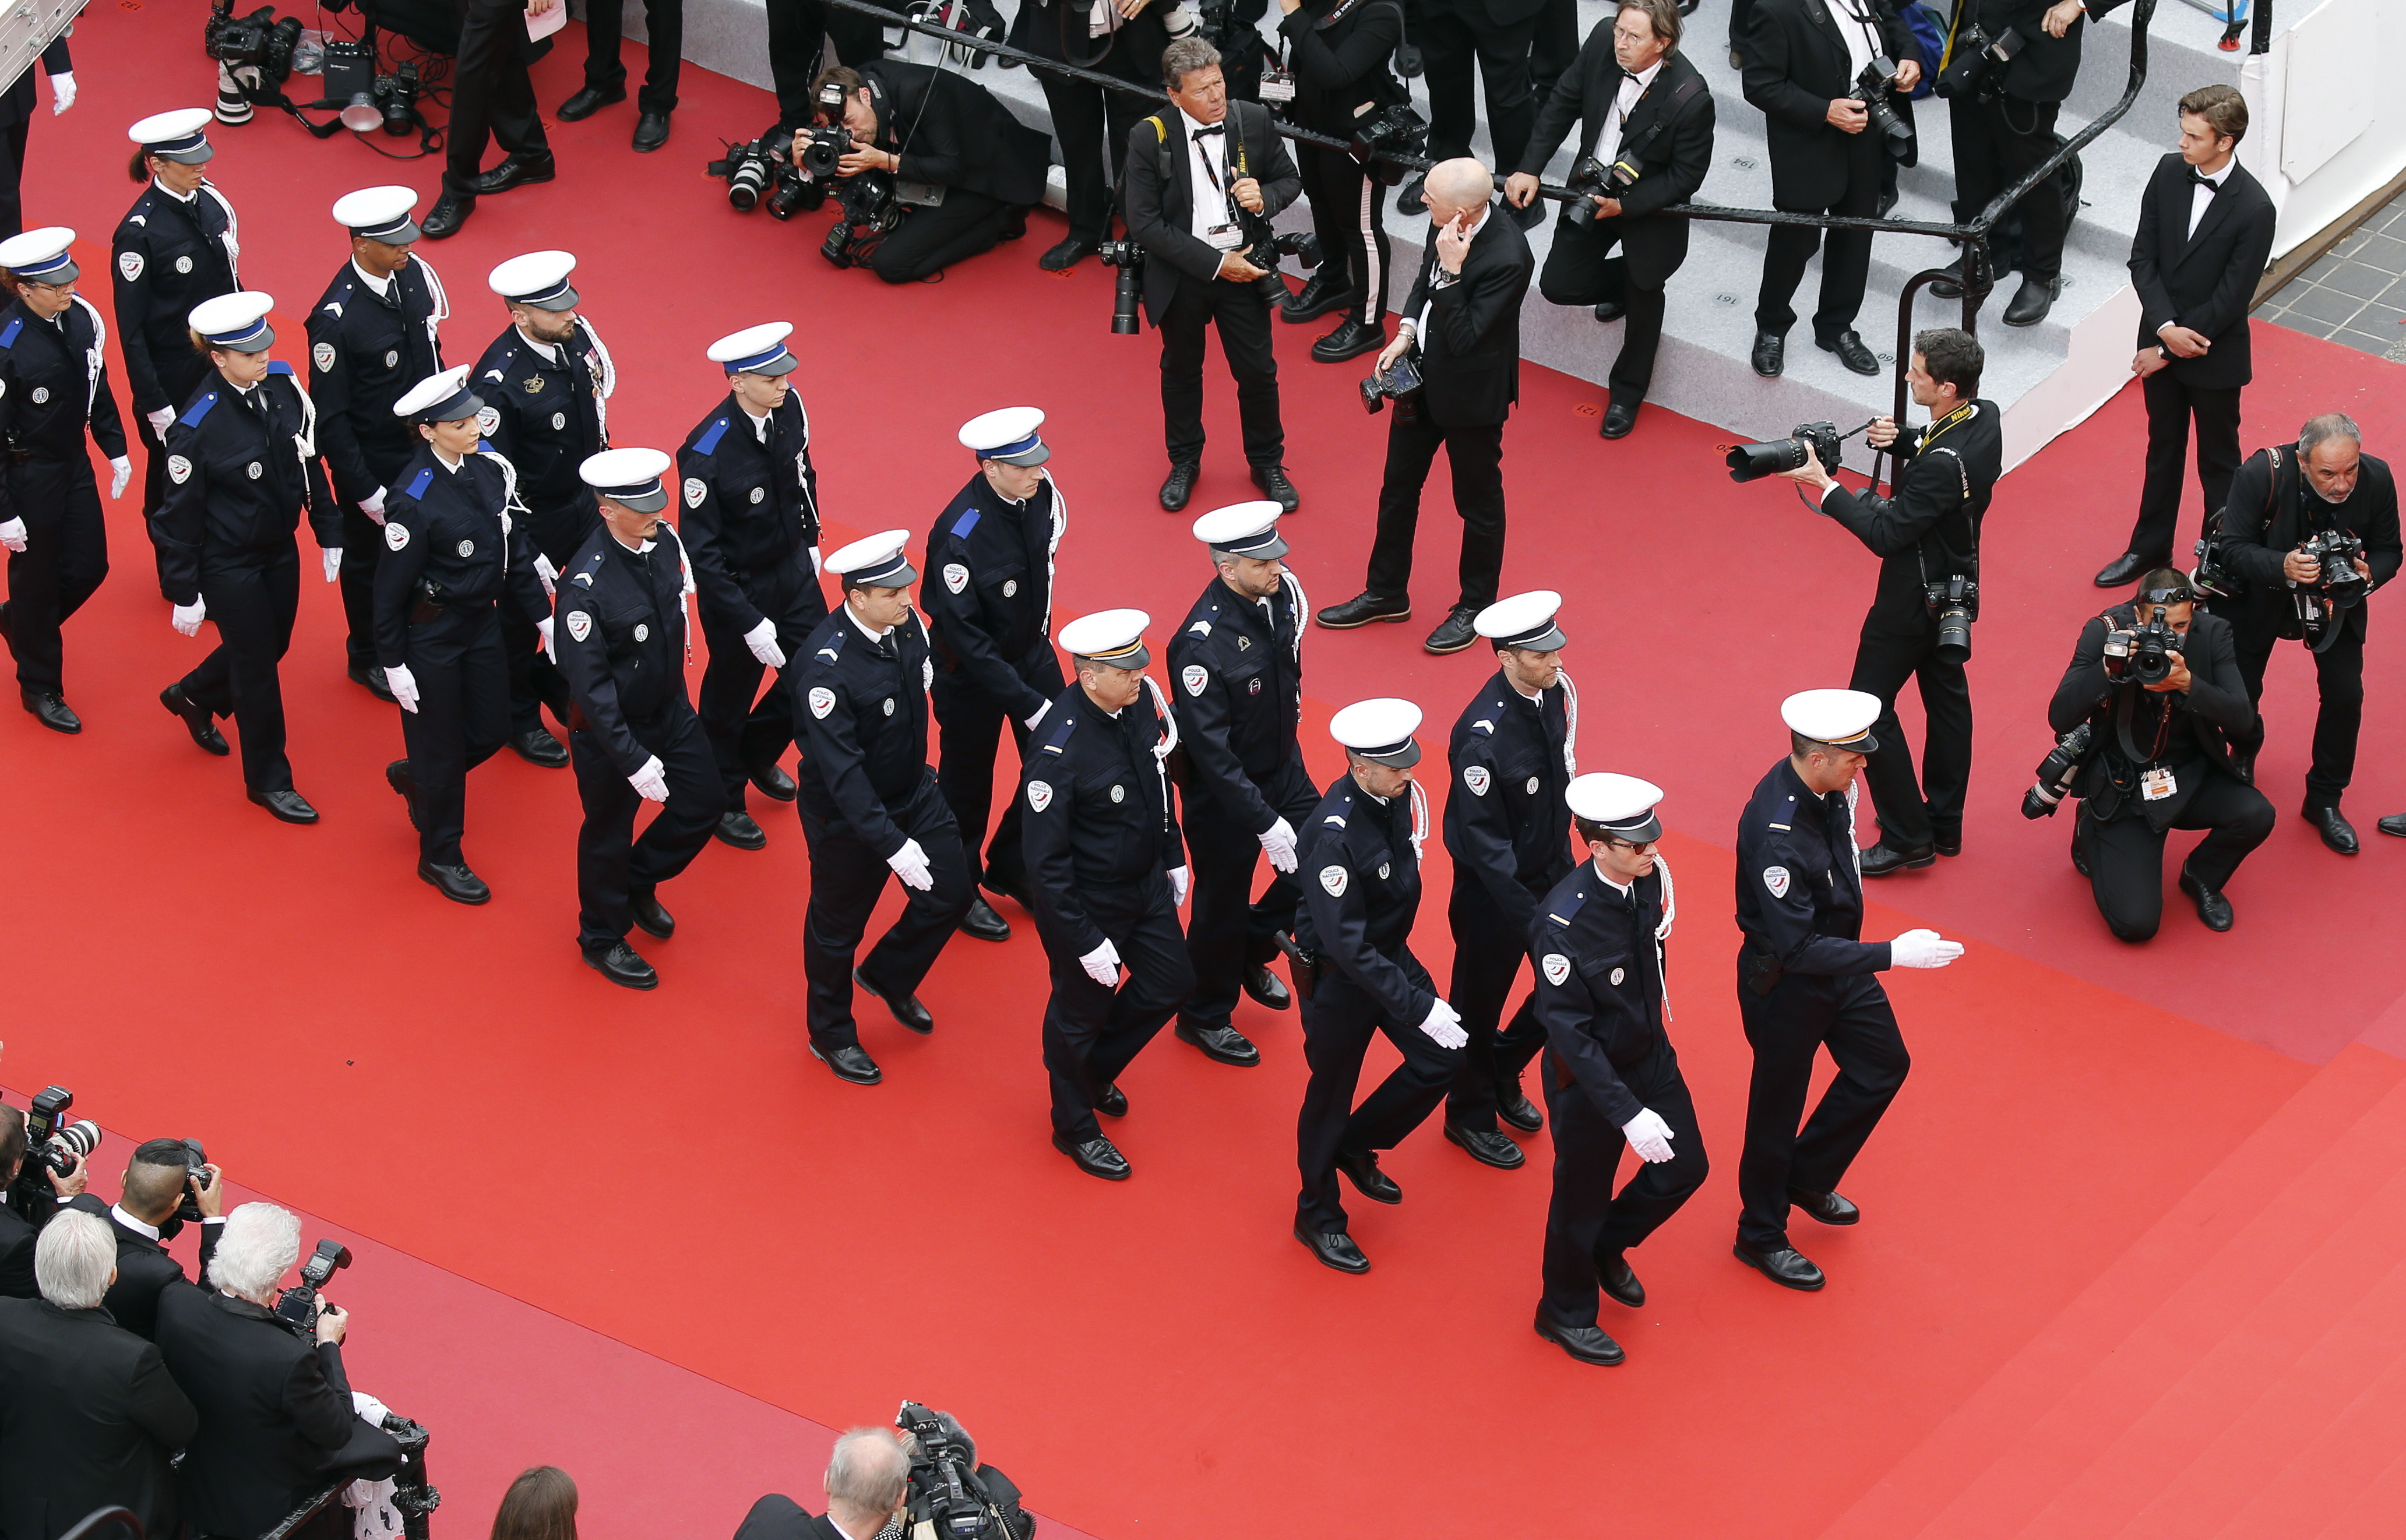 2019-05-14T154254Z_2105018075_UP1EF5E17NIWZ_RTRMADP_3_FILMFESTIVAL-CANNES-OPENING-CEREMONY